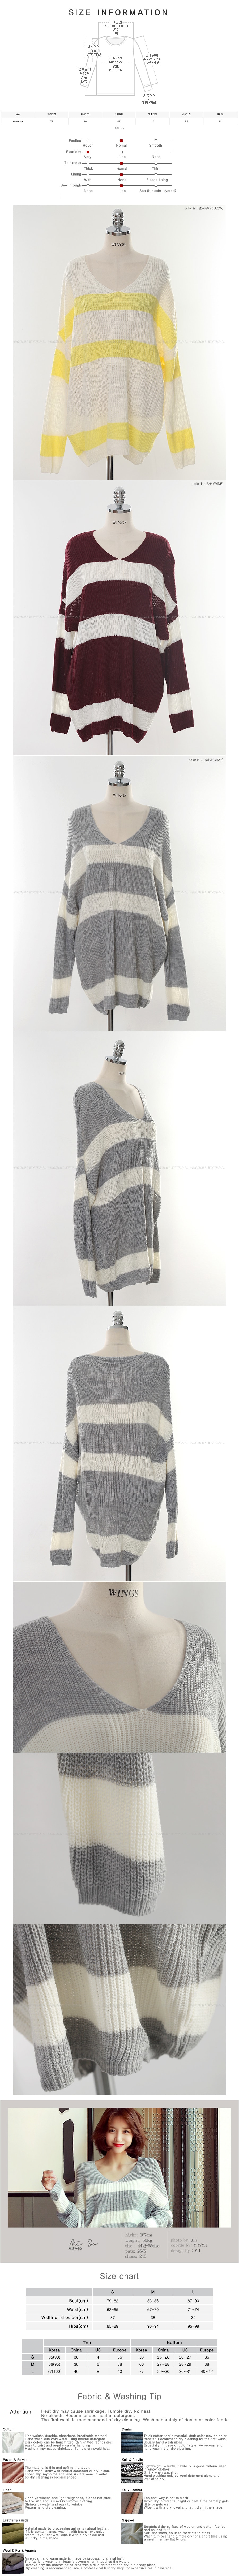 WINGS Striped V-Neck Tunic Knit Top #Grey One Size(Free)